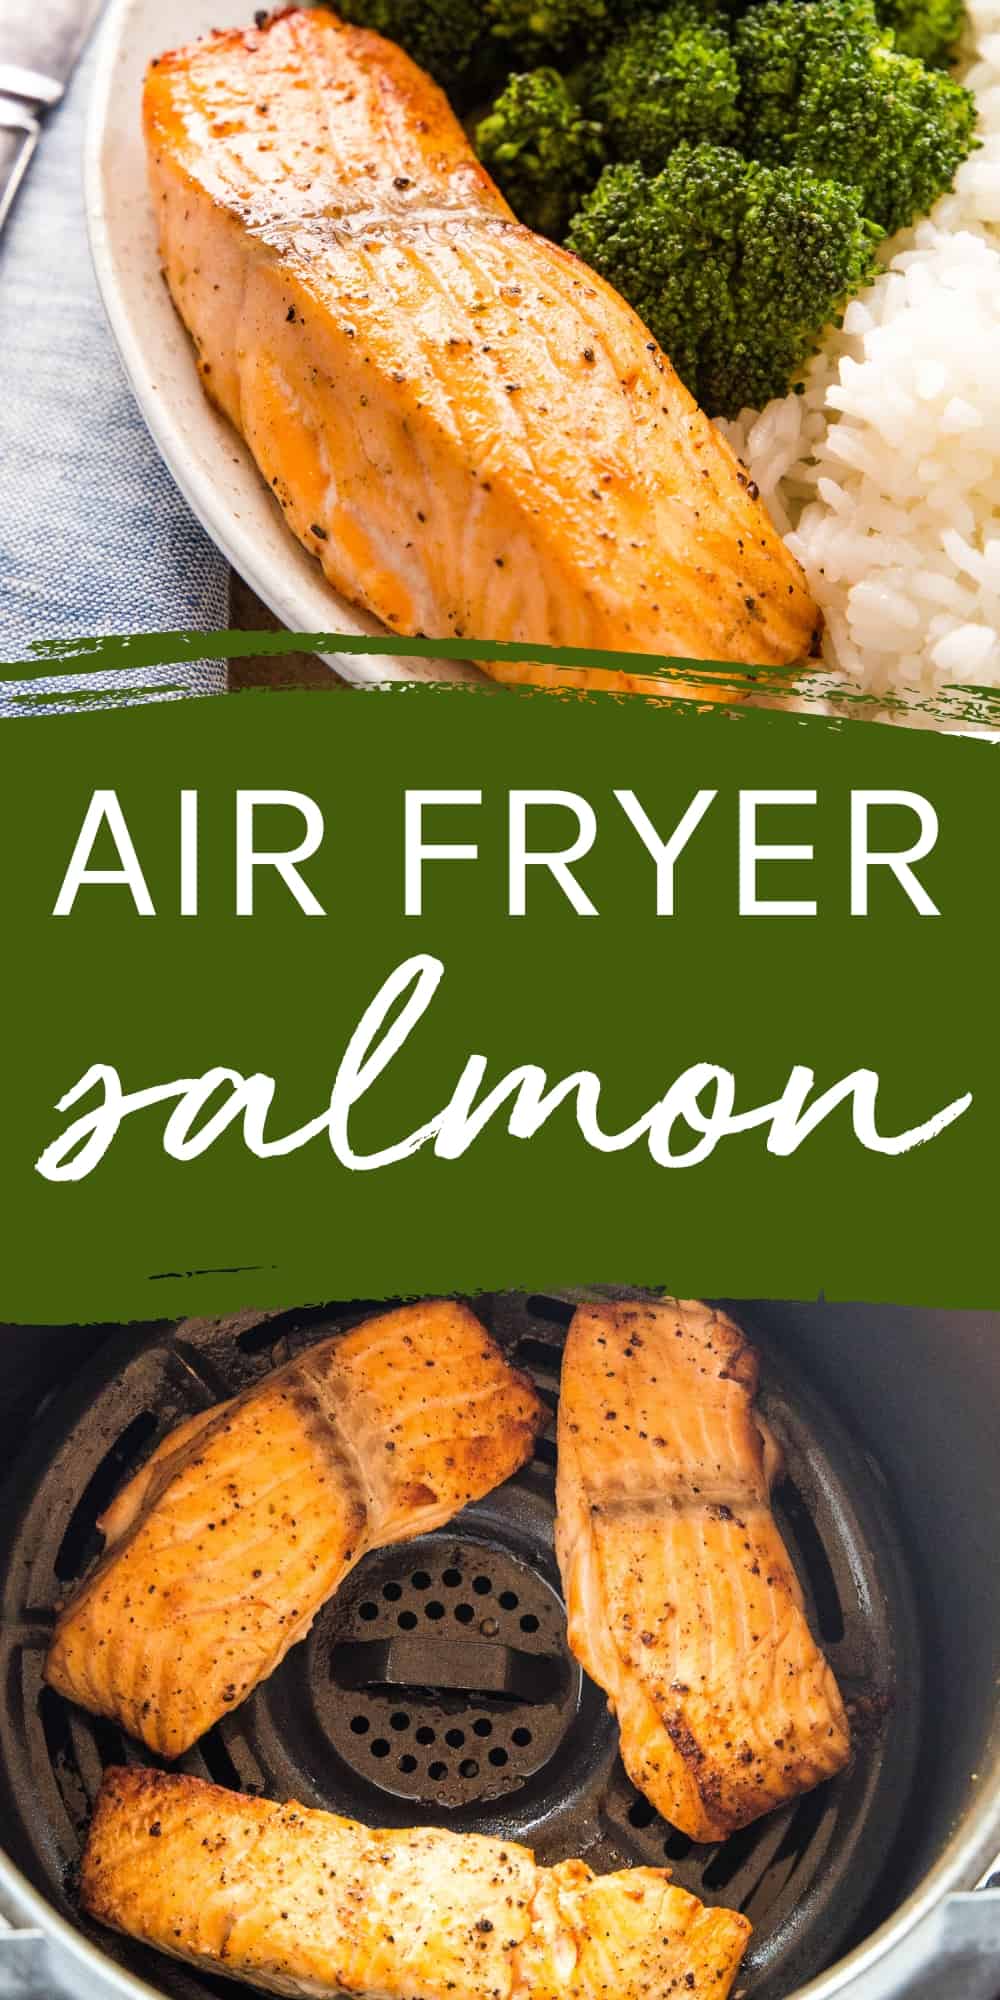 This Air Fryer Salmon is tender on the inside with a crispy exterior. Make it in 20 minutes or less with fresh or frozen salmon! Recipe from thebusybaker.ca! #airfryersalmon #bakedsalmon #healthyrecipes #dinner #mealprep #lowcarb #familymeal #lowfat #salmon #healthysalmonrecipe via @busybakerblog